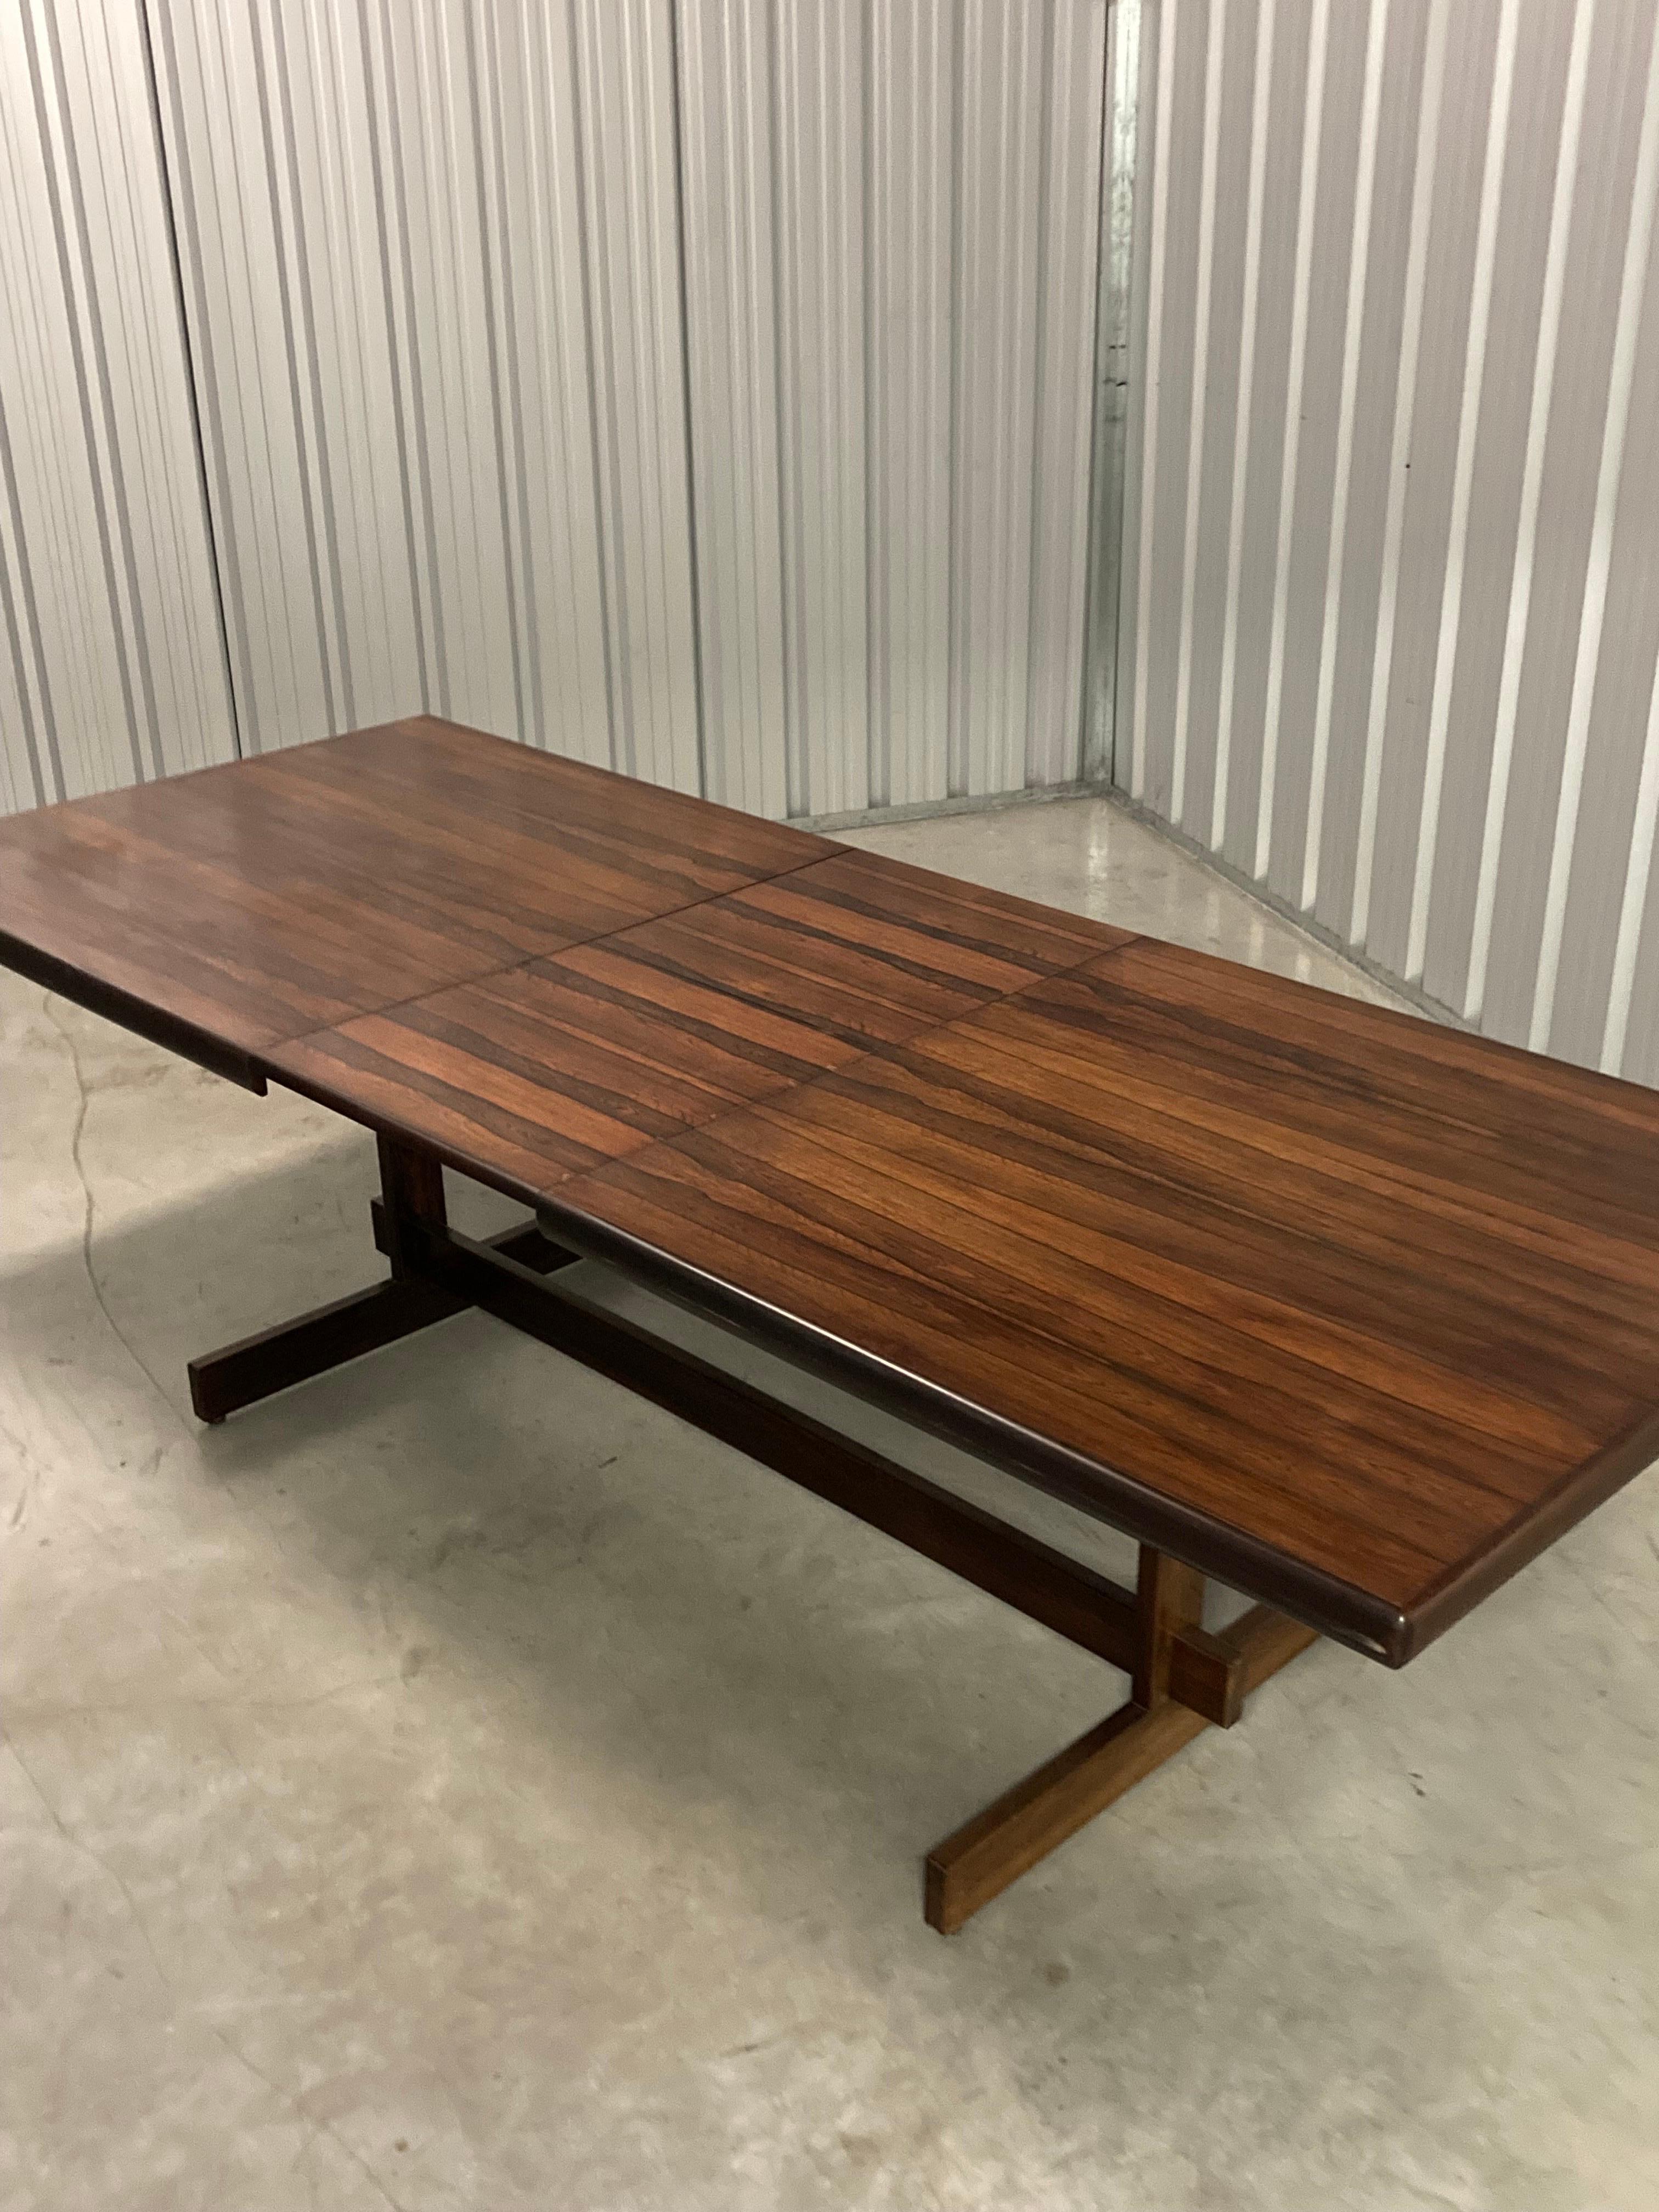 1950s Brazilian Design Extending Dining Table by Celina Decorações

Fold out extension leaf contained within the structure of the table, underneath the table top, which adds 50 cm, making the table 249 cm long. 


Celina Decorações
Rio de Janeiro